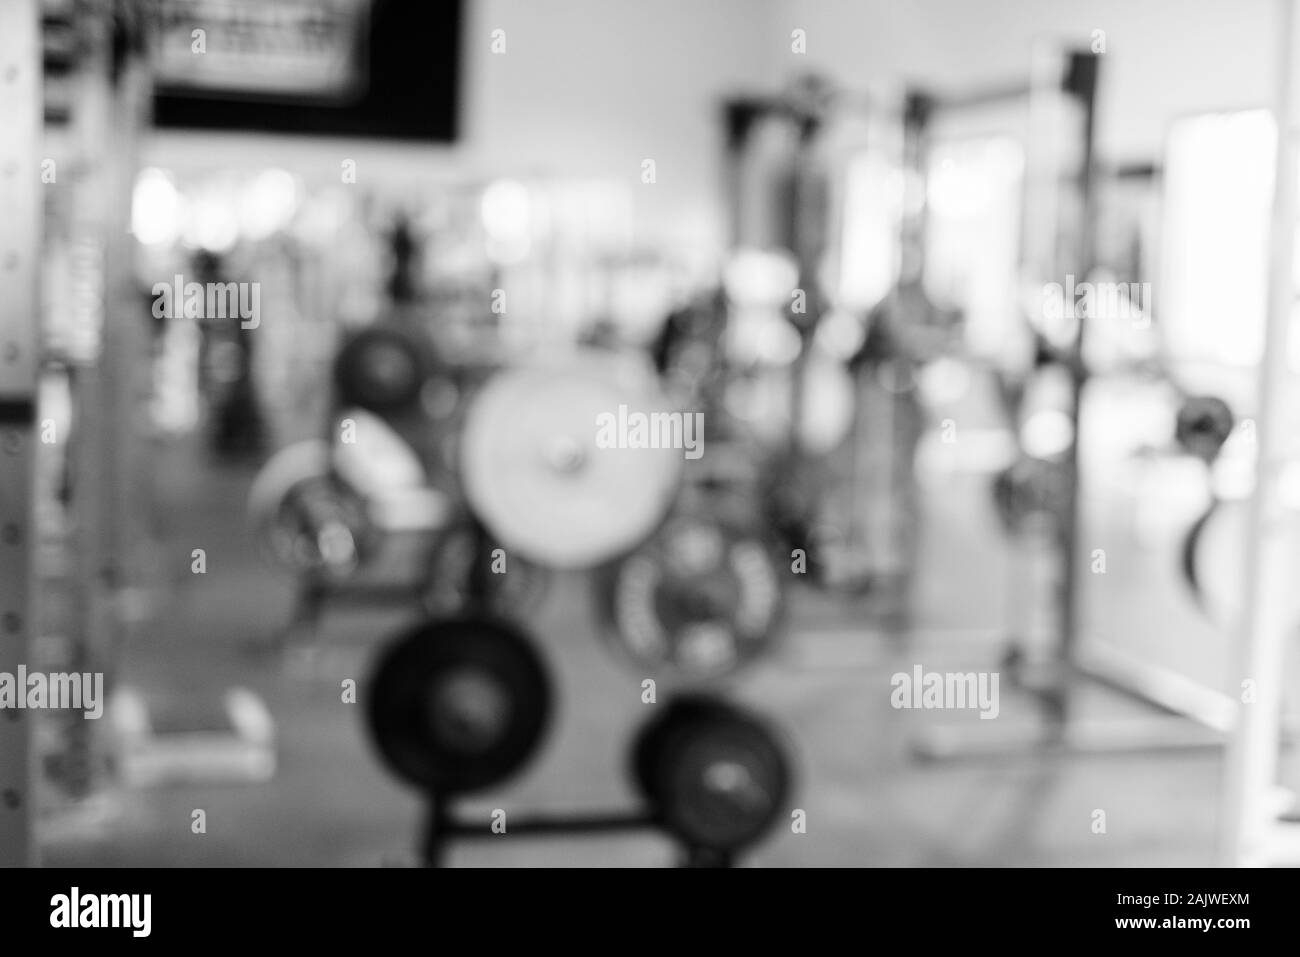 Defocused View Of Gym With Exercise Equipment Stock Photo